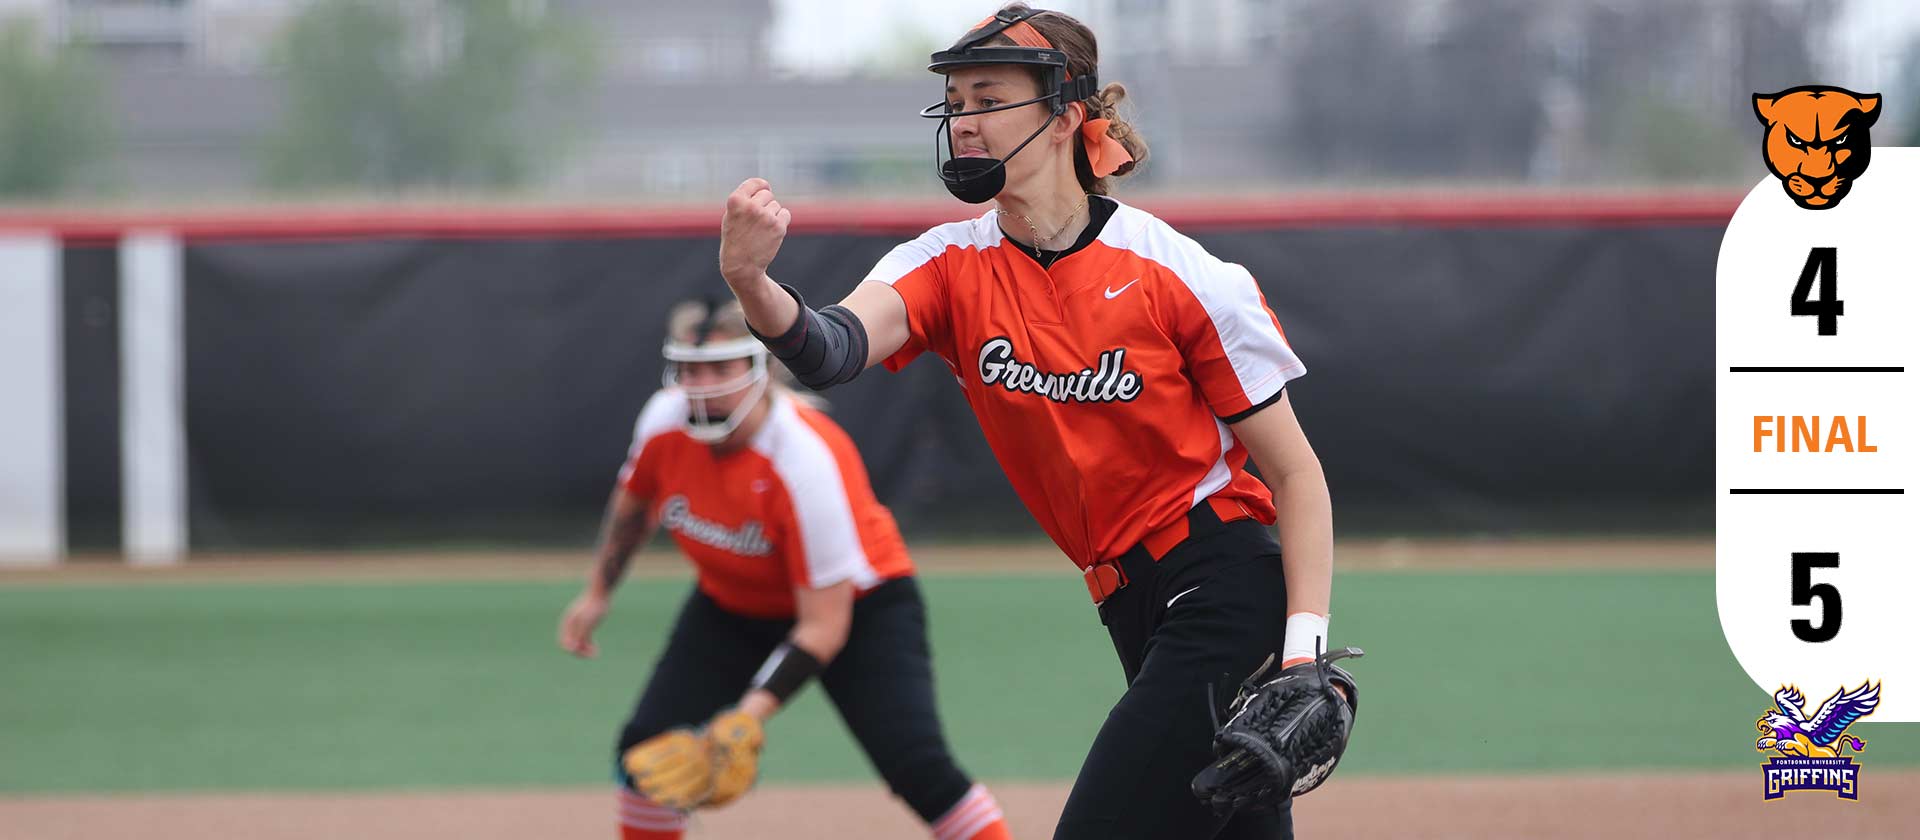 Softball season concludes Friday with 5-4 loss to Fontbonne in eight innings